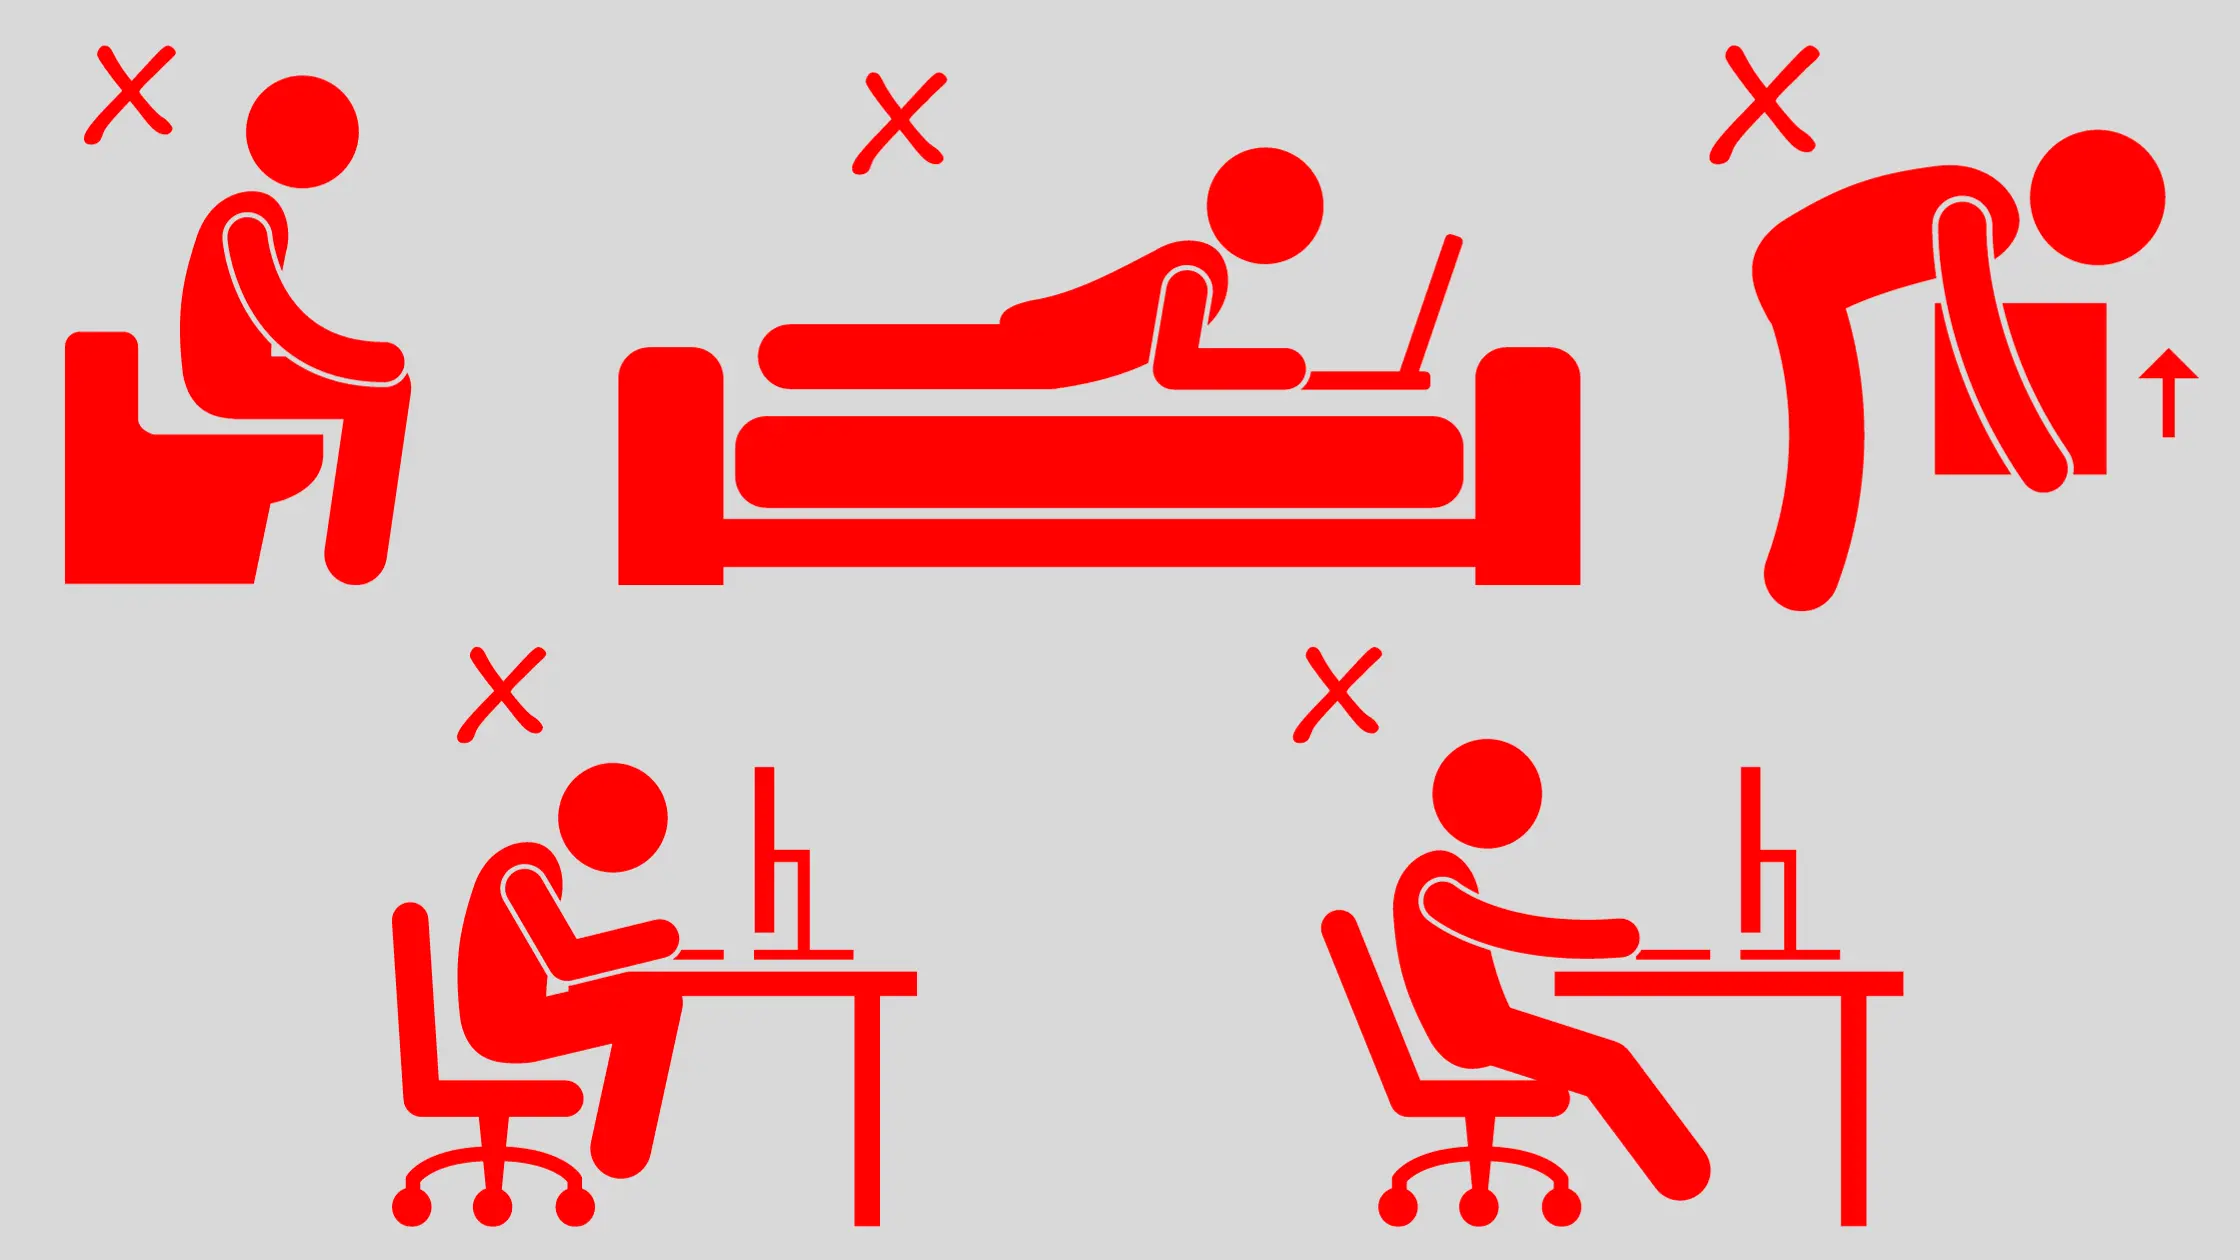 Incorrect postures and excessive lumbar extension at work, at the computer, when lying in bed, can aggravate the symptoms of spondylolisthesis